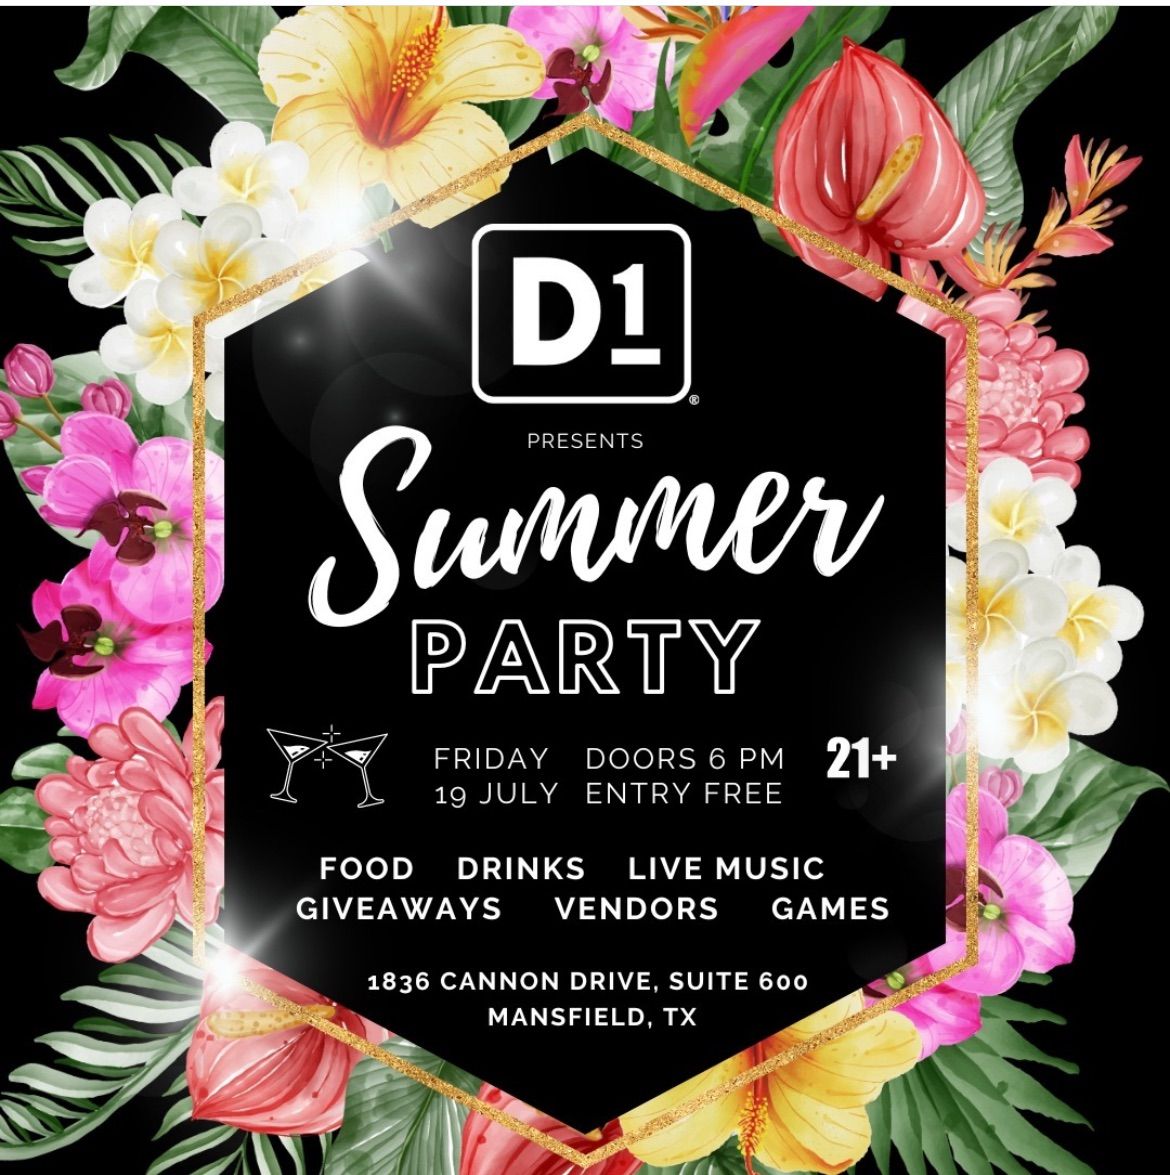 D1 Training Summer Party